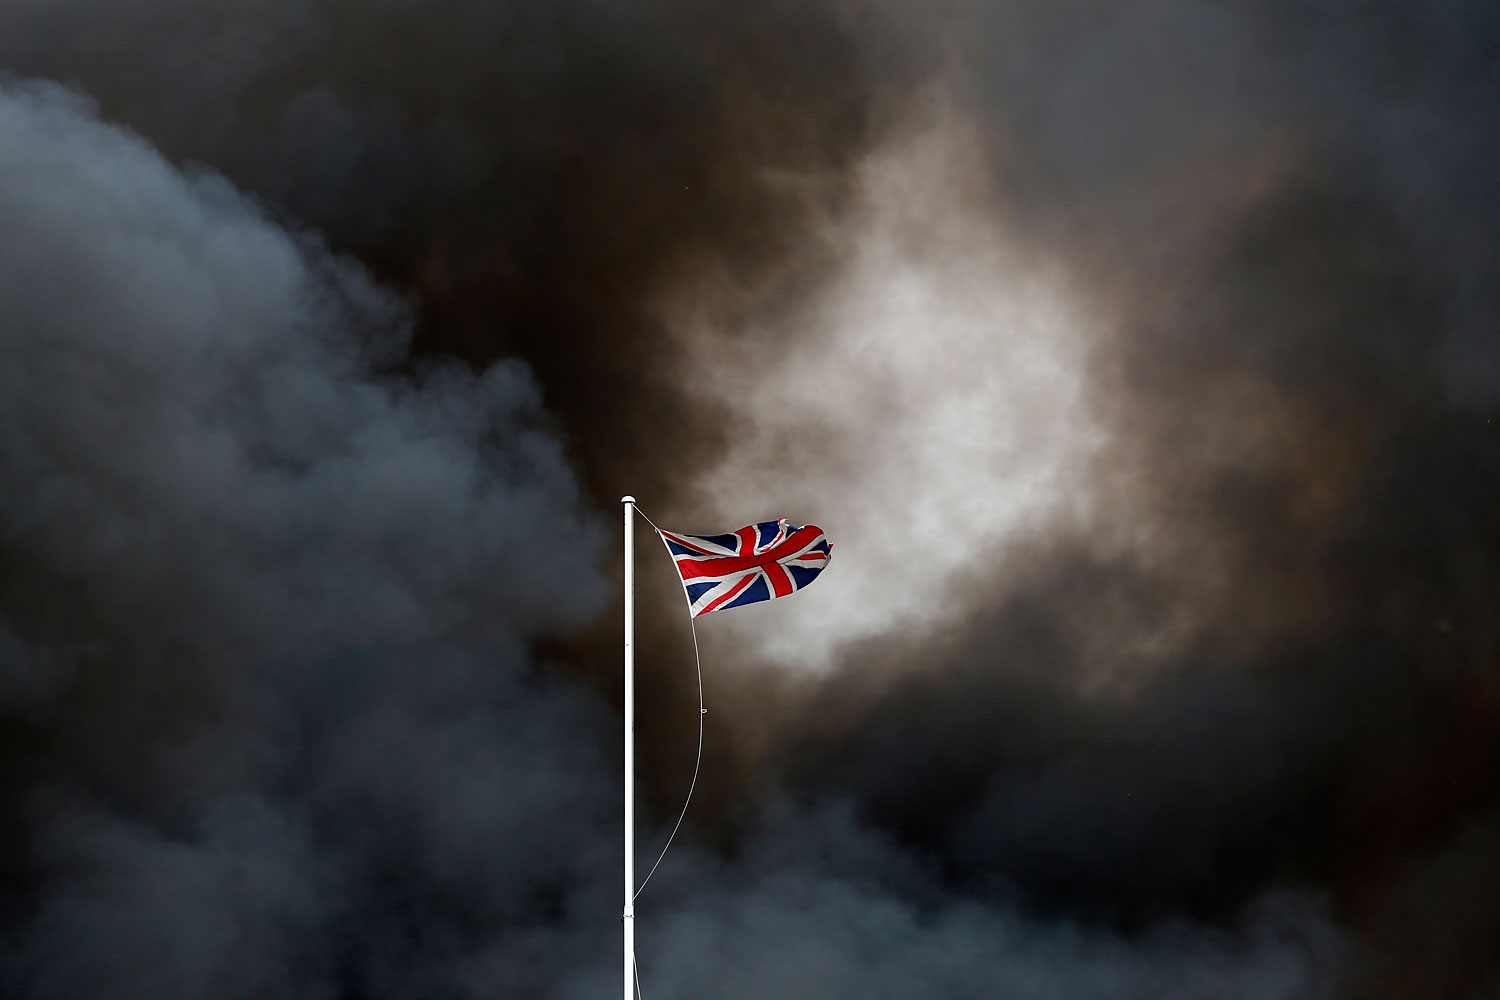 July 1, 2013. Smoke rises behind the Union Flag from a fire at a recycling plant in Smethwick, central England. Firefighters are tackling the blaze involving 100,000 tons of plastic recycling material.